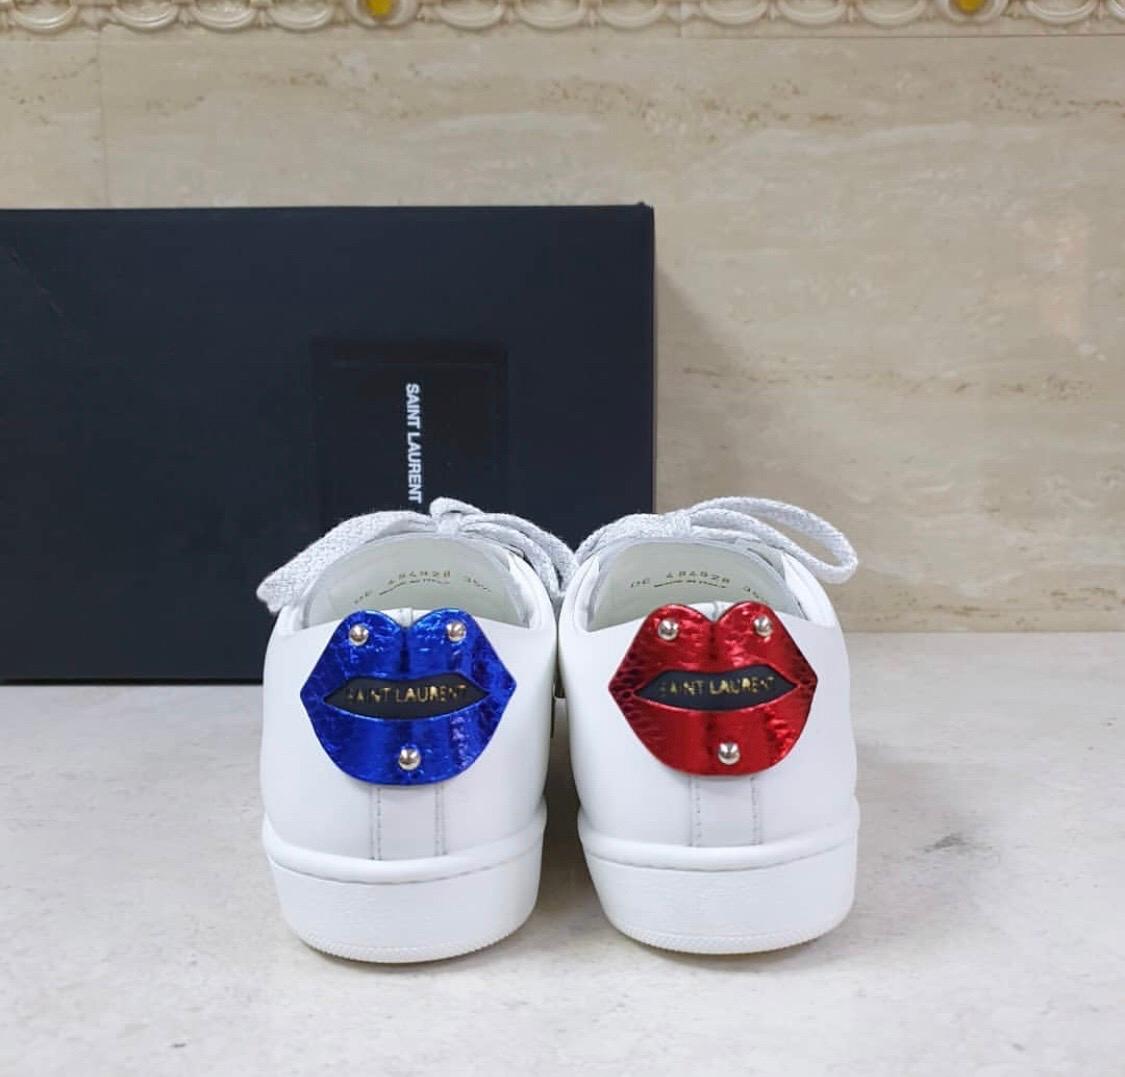 Saint Laurent’s cult Court Classic sneakers to feature red and blue snakeskin appliqué lips at the heel counter. Cut in a flattering low top silhouette, italian made with a lace-up front fastening with silver laces, logo branding at the tongue and